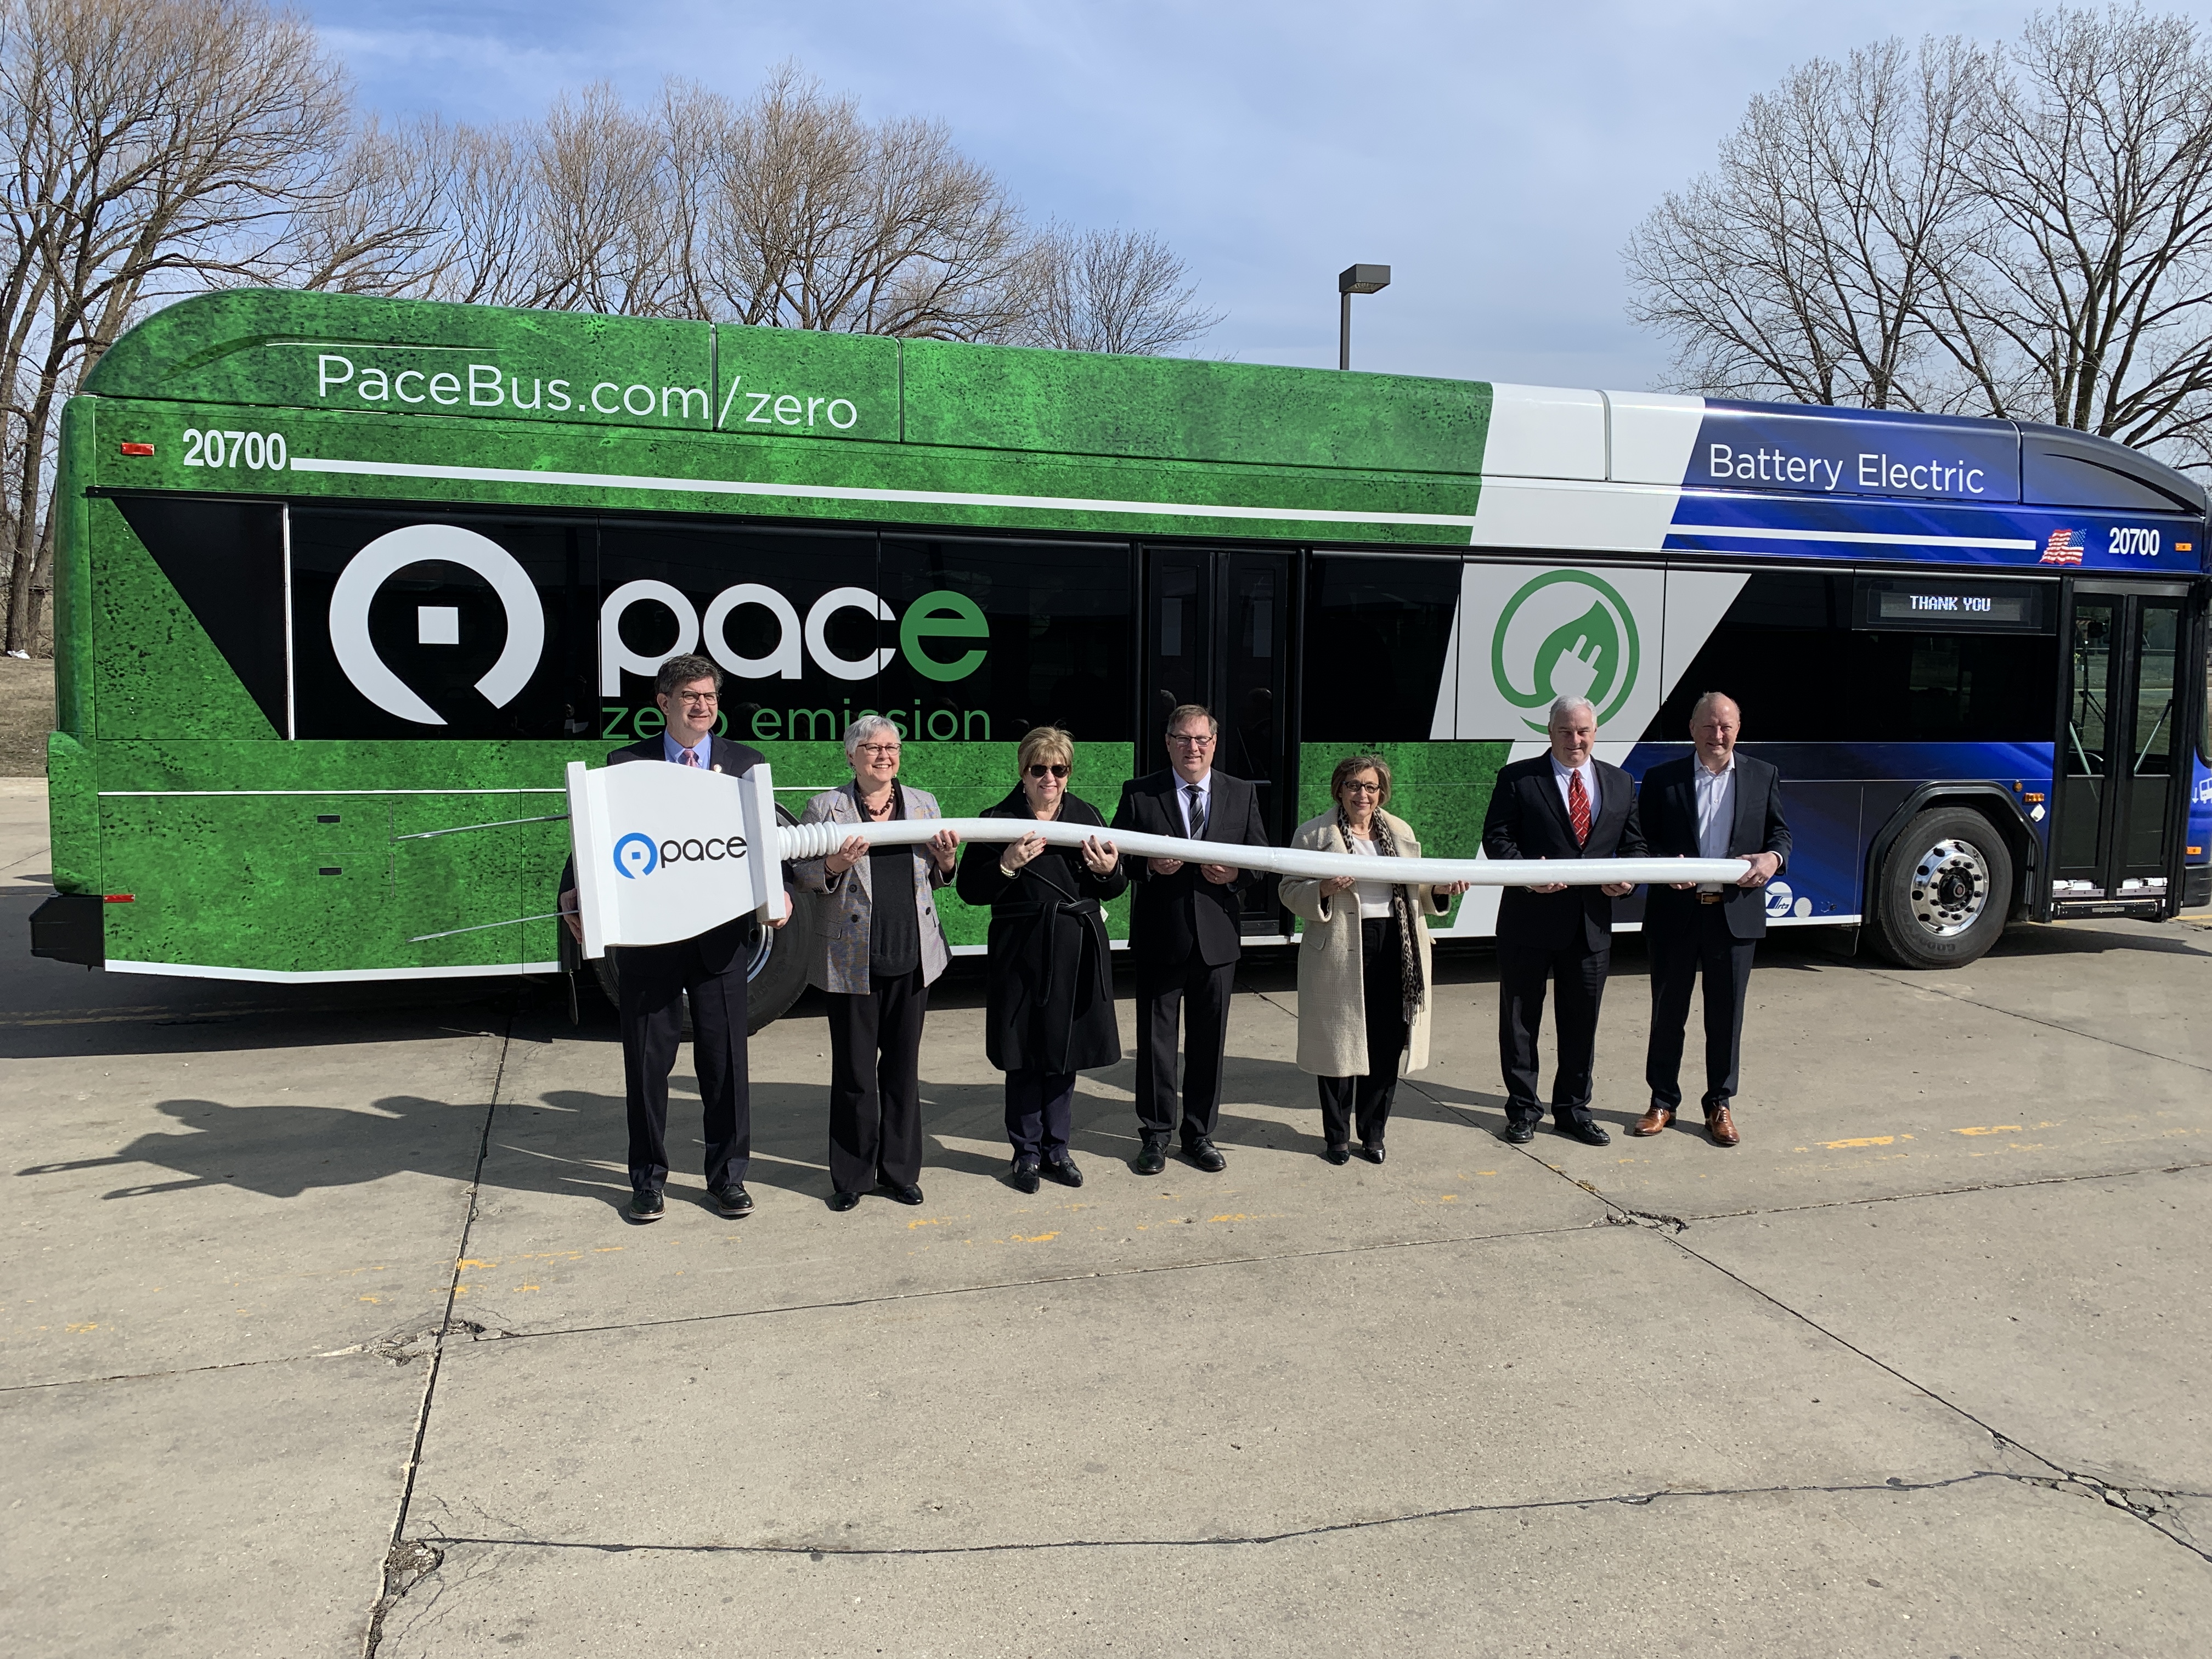 Photo of (L-R) Congressman Brad Schneider; Pace Director Linda Soto; Waukegan Mayor Ann Taylor, Pace Chairman Rick Kwasneski; Pace Executive Director Melinda Metzger; Pace Director Chris Canning; and Lake County Partners President Kevin Considine in front of a Pace electric bus